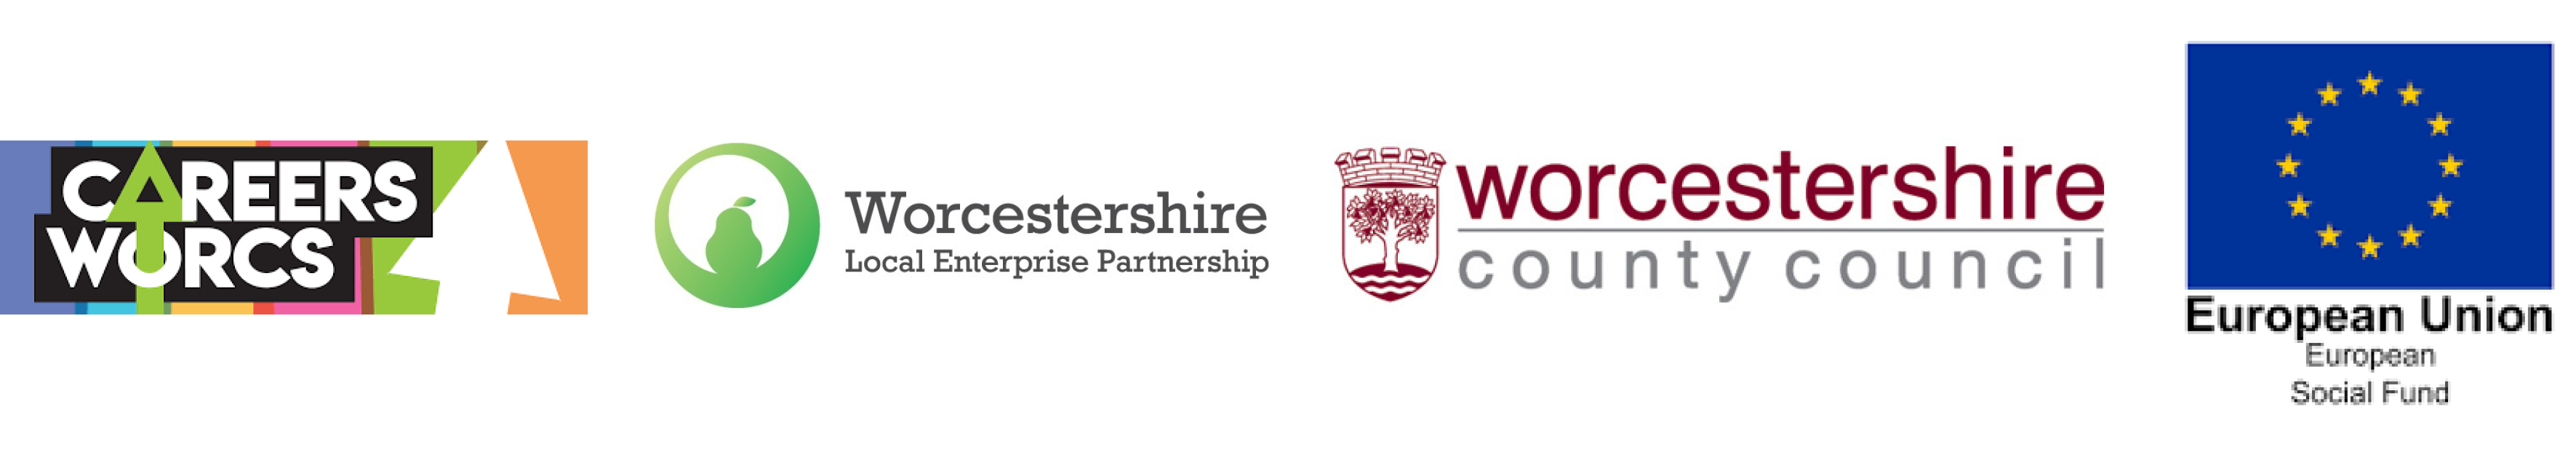 Logos for Careers Worcs, Worcestershire Local Enterprise Partnership, Worcestershire County Council and European Union European Social Fund